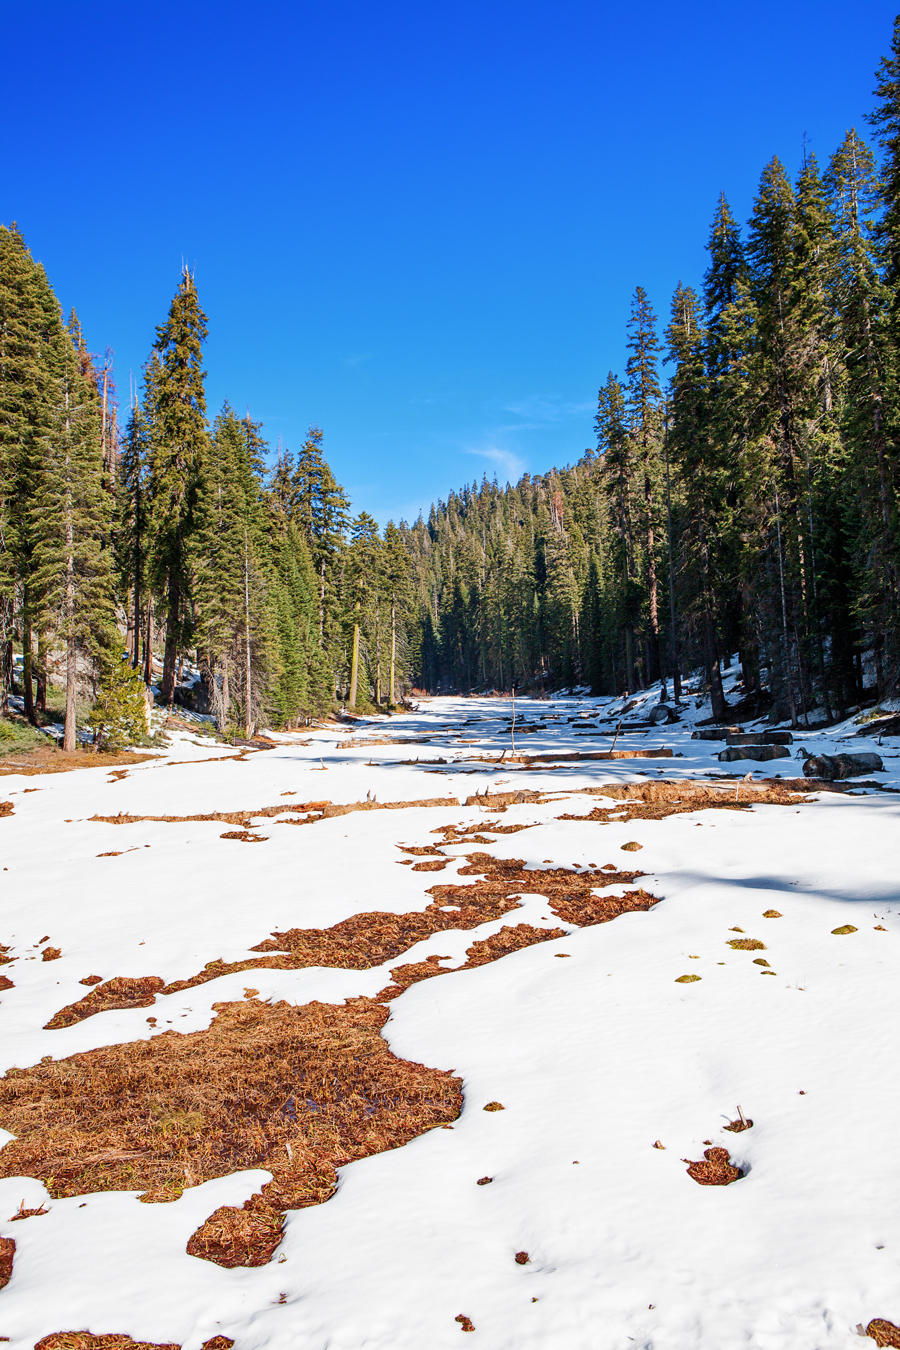 Winter in Sequoia & Kings Canyon National Parks